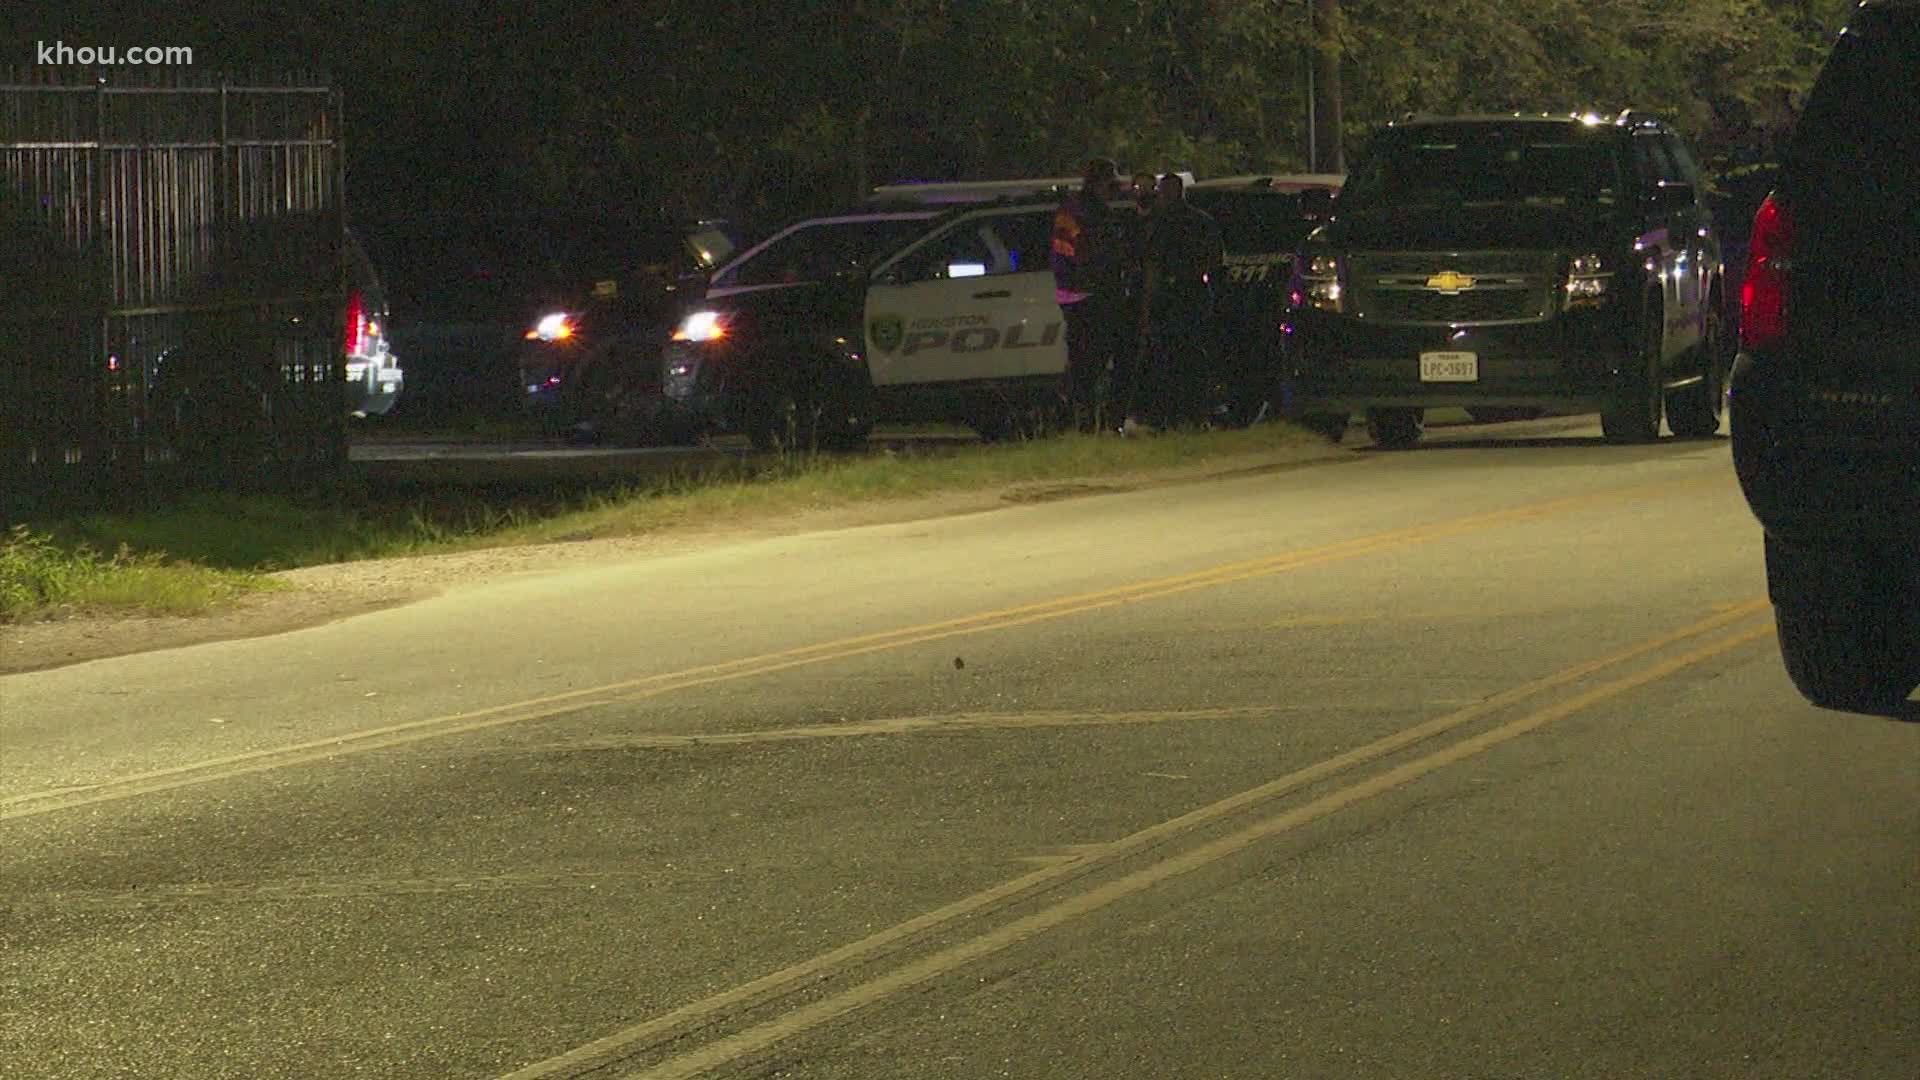 A 3-year-old boy is dead and his mother was wounded after her boyfriend opened fire on them Friday night at a home in southeast Houston, police said.